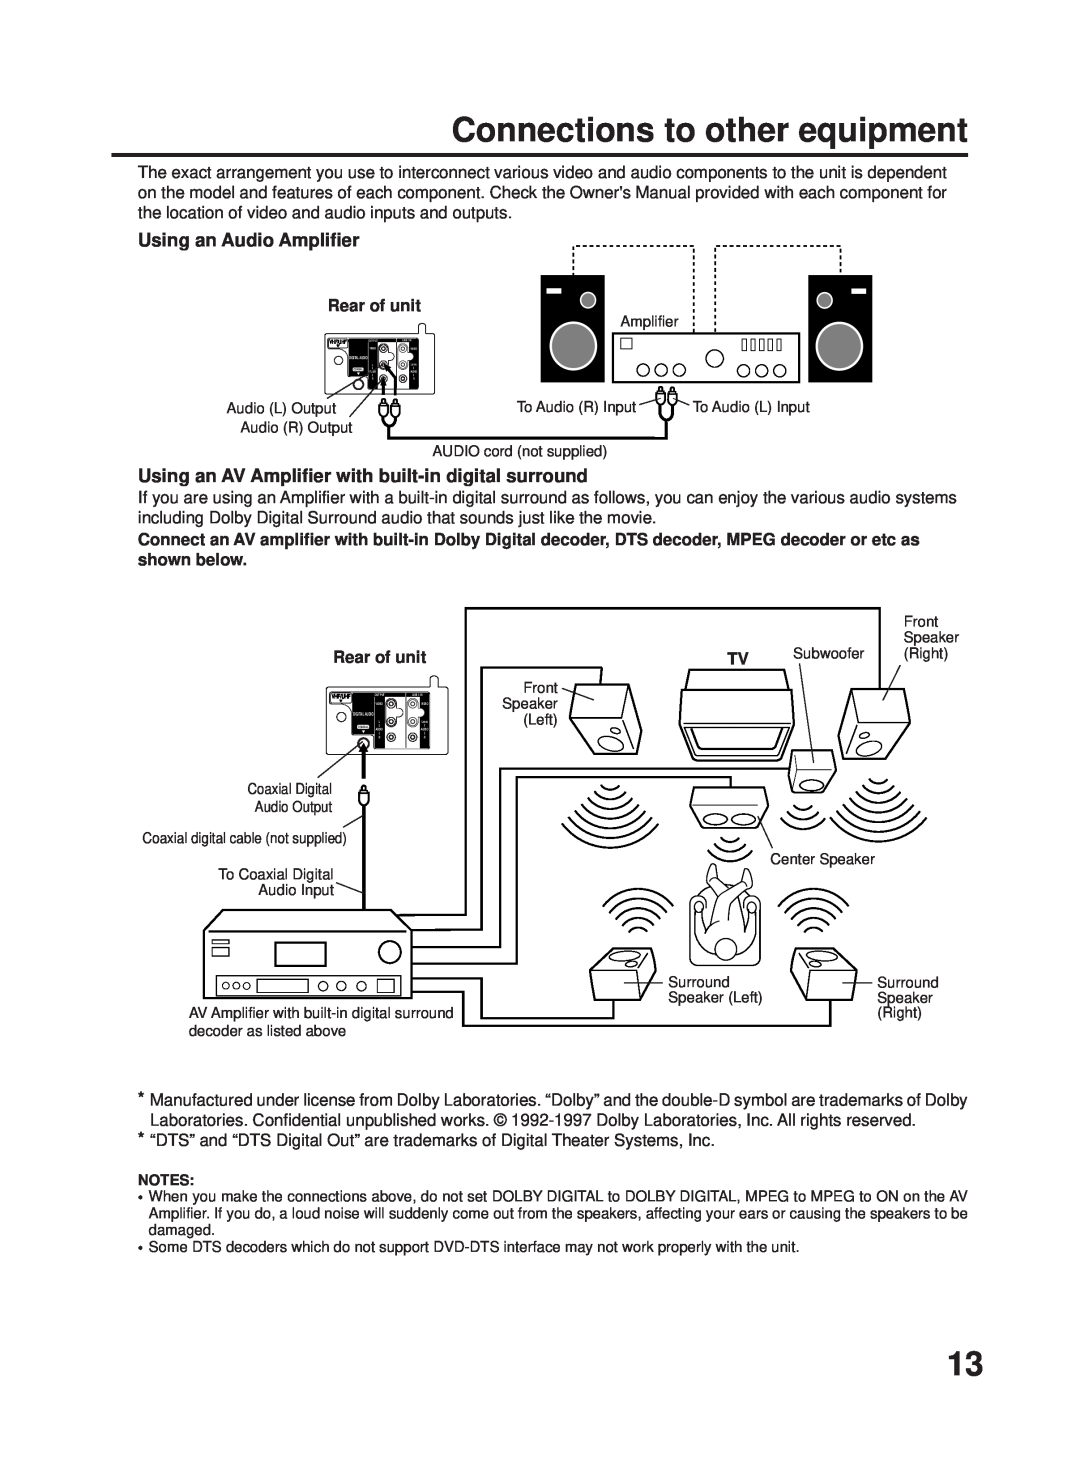 RCA 27F500TDV manual Connections to other equipment, Using an Audio Amplifier, Rear of unit 